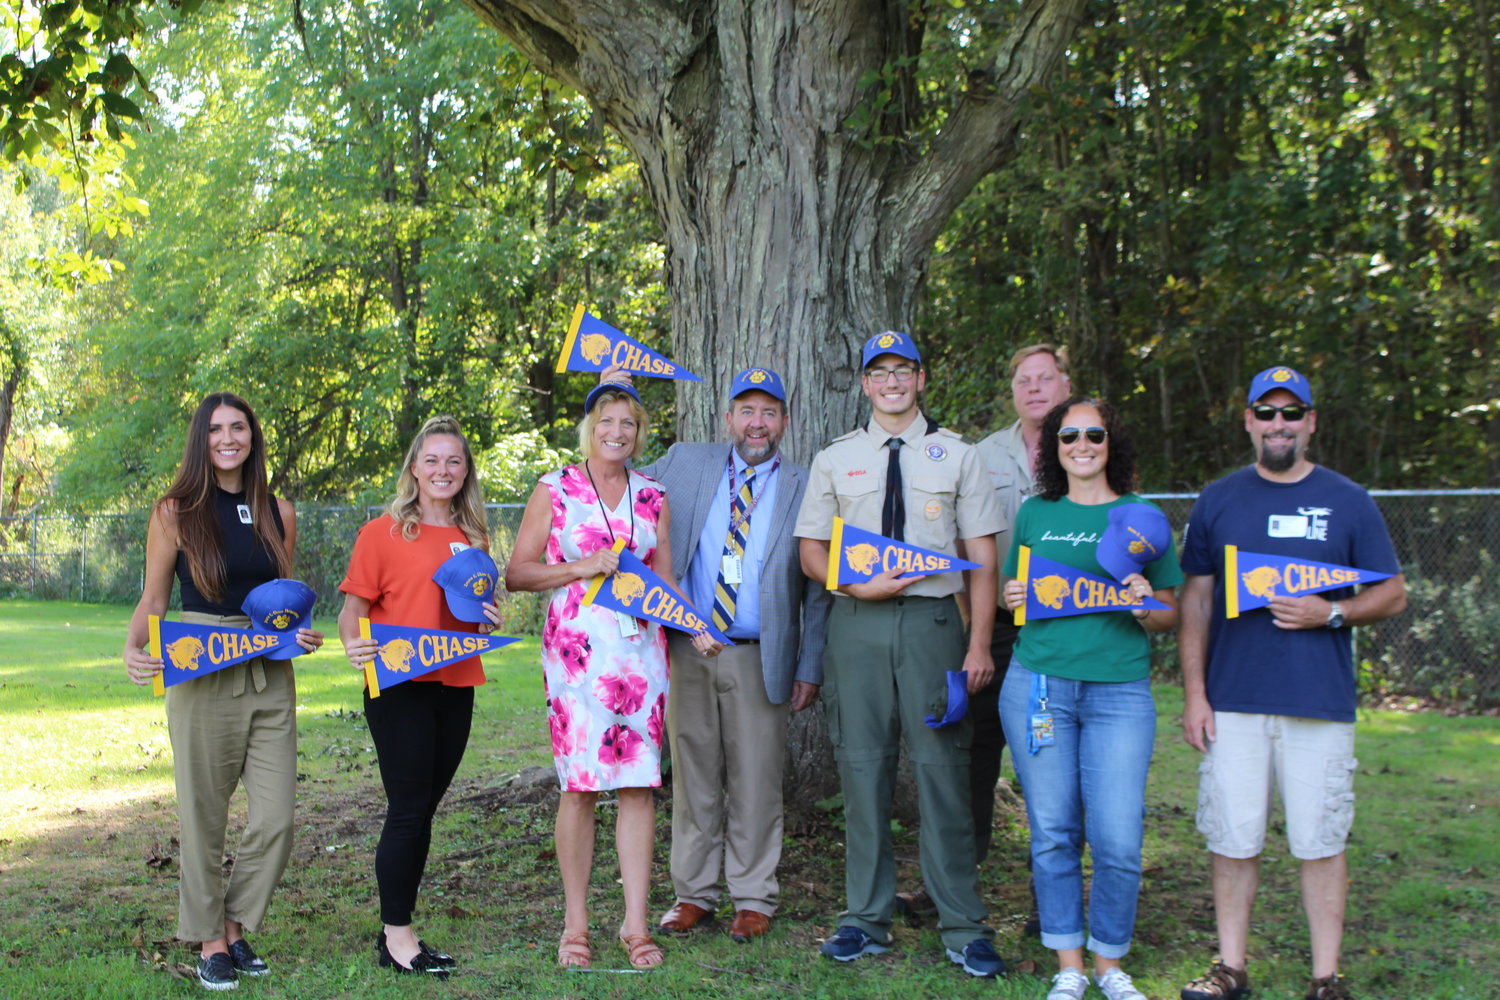 Many people contributed to the Chase School's outdoor classroom. Pictured are Cortney Larson, left Meaghan Mullalley-Gorr; MaryAnn Swensen; William Frandino; David Cooper; Troop 92 leader Paul Langowski; and David’s parents, Dina and David Cooper.